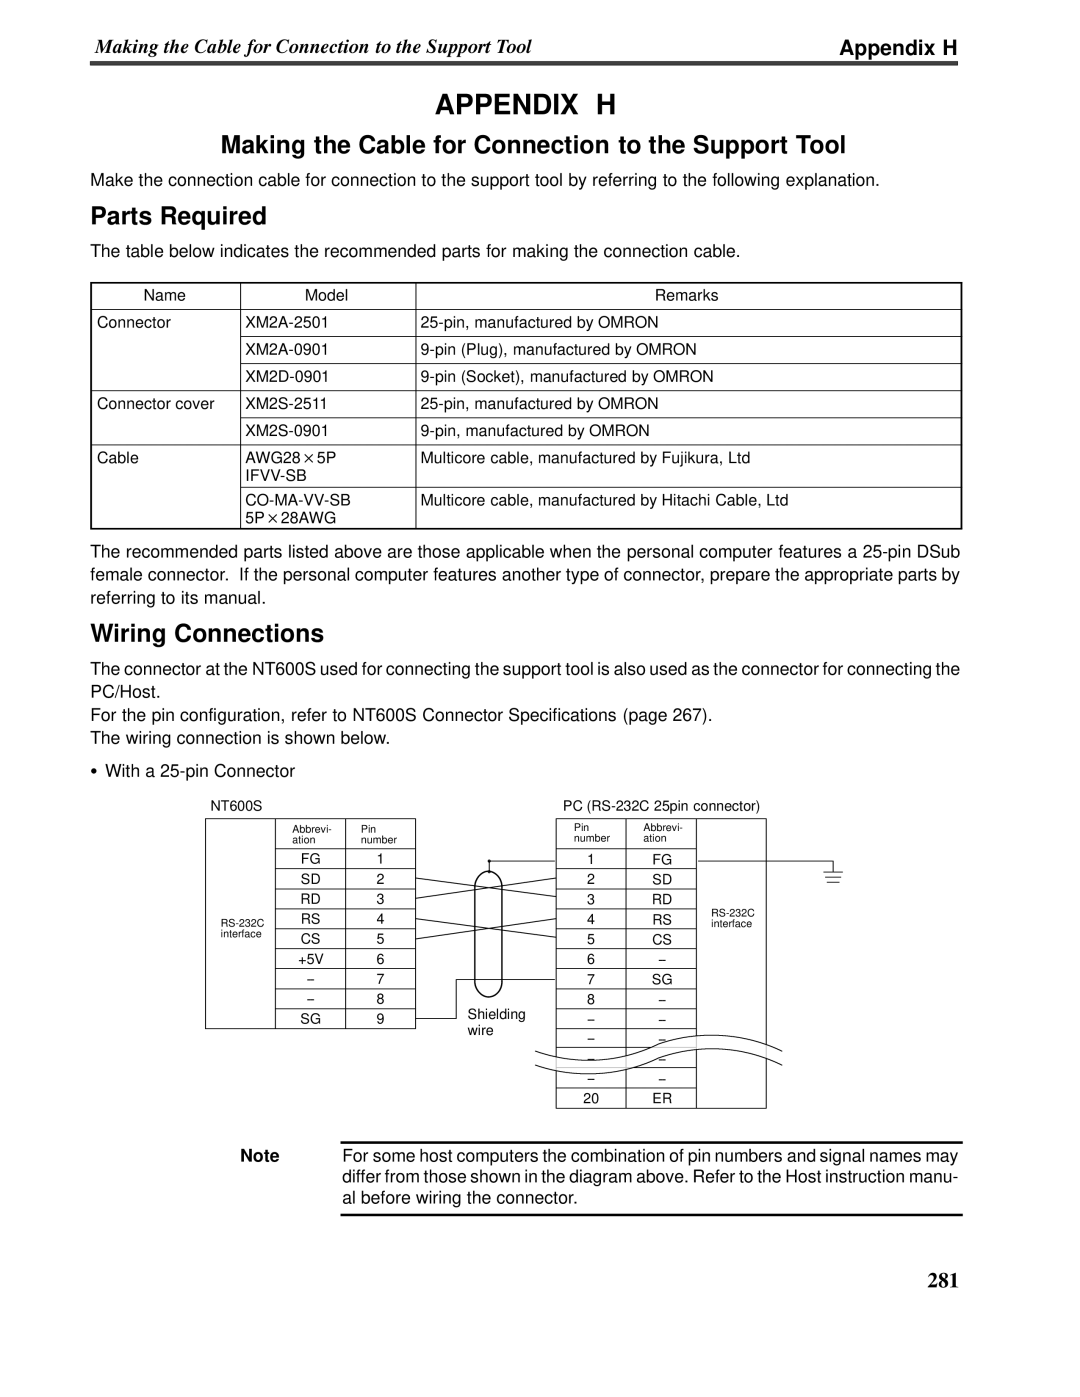 Omron V022-E3-1 operation manual Appendix H, Parts Required, Wiring Connections 